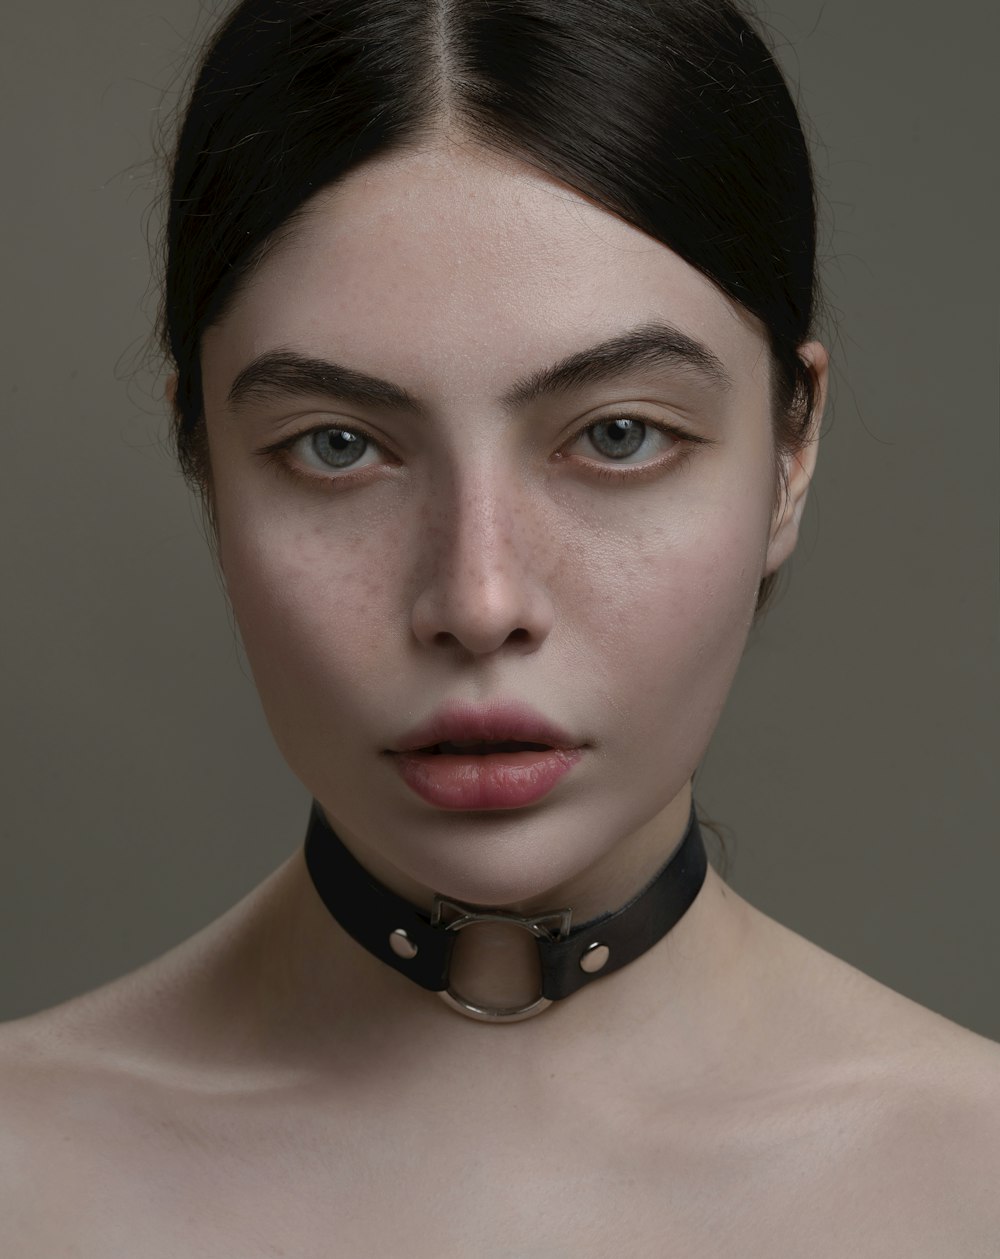 a woman with a choker around her neck